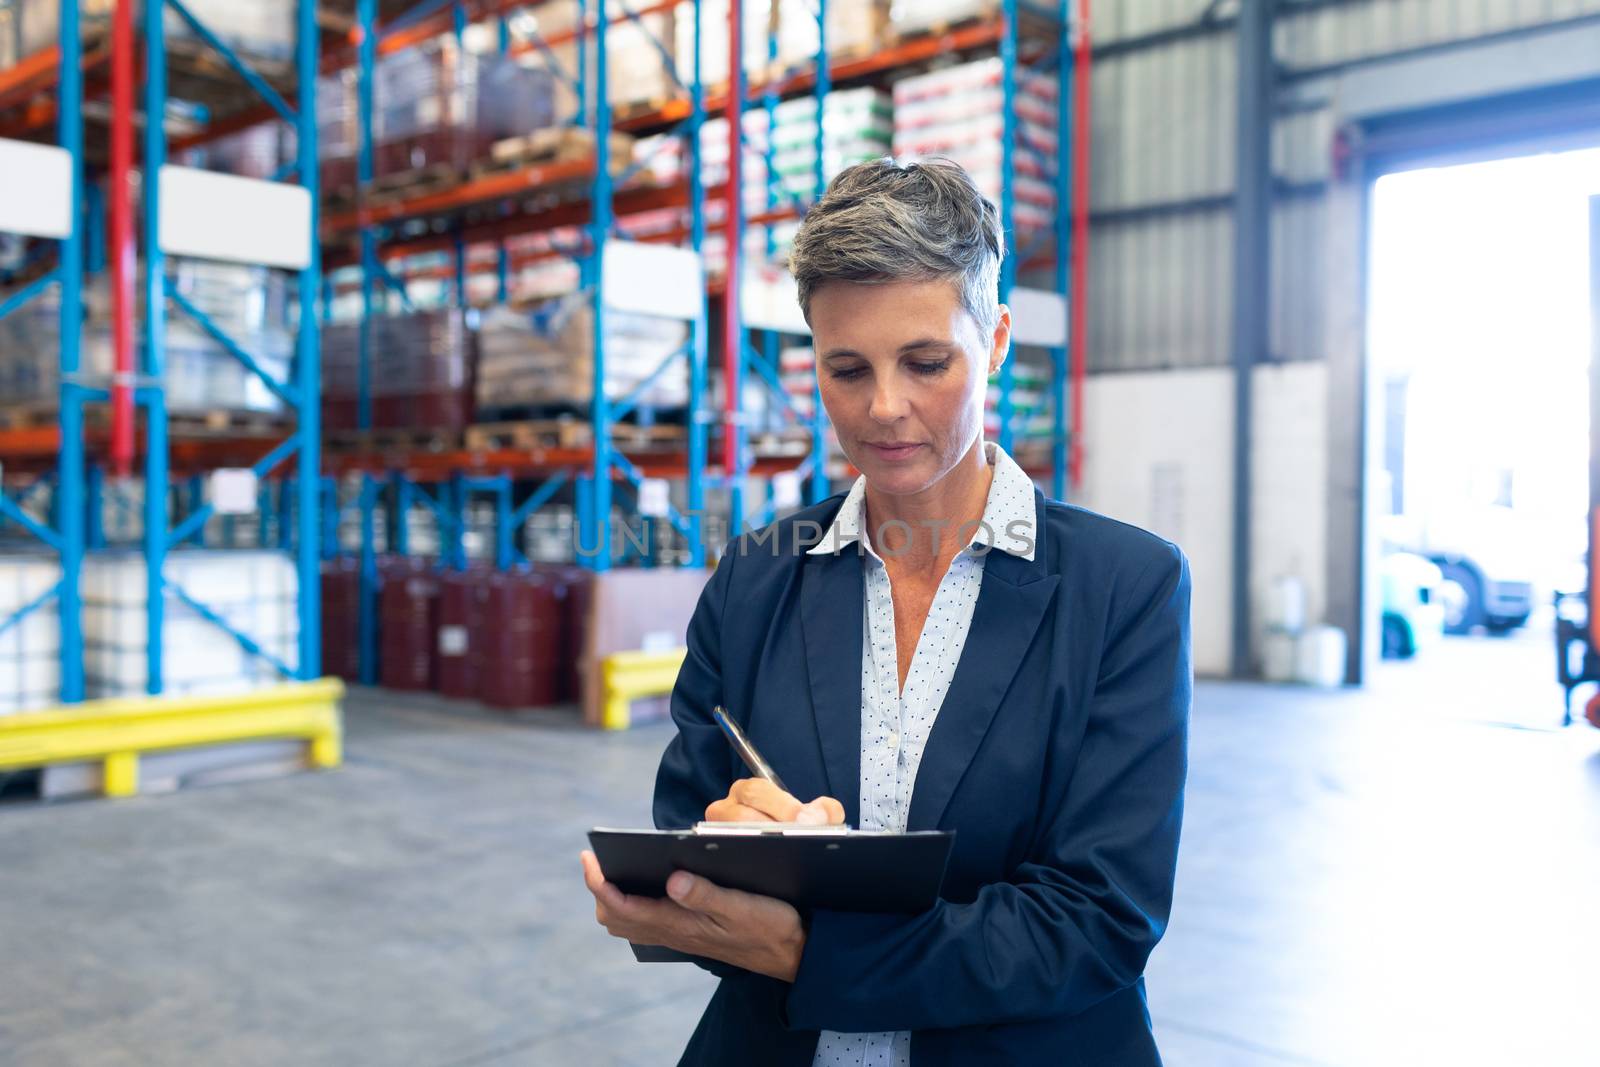 Front view of beautiful mature Caucasian female manager writing on clipboard in warehouse. This is a freight transportation and distribution warehouse. Industrial and industrial workers concept